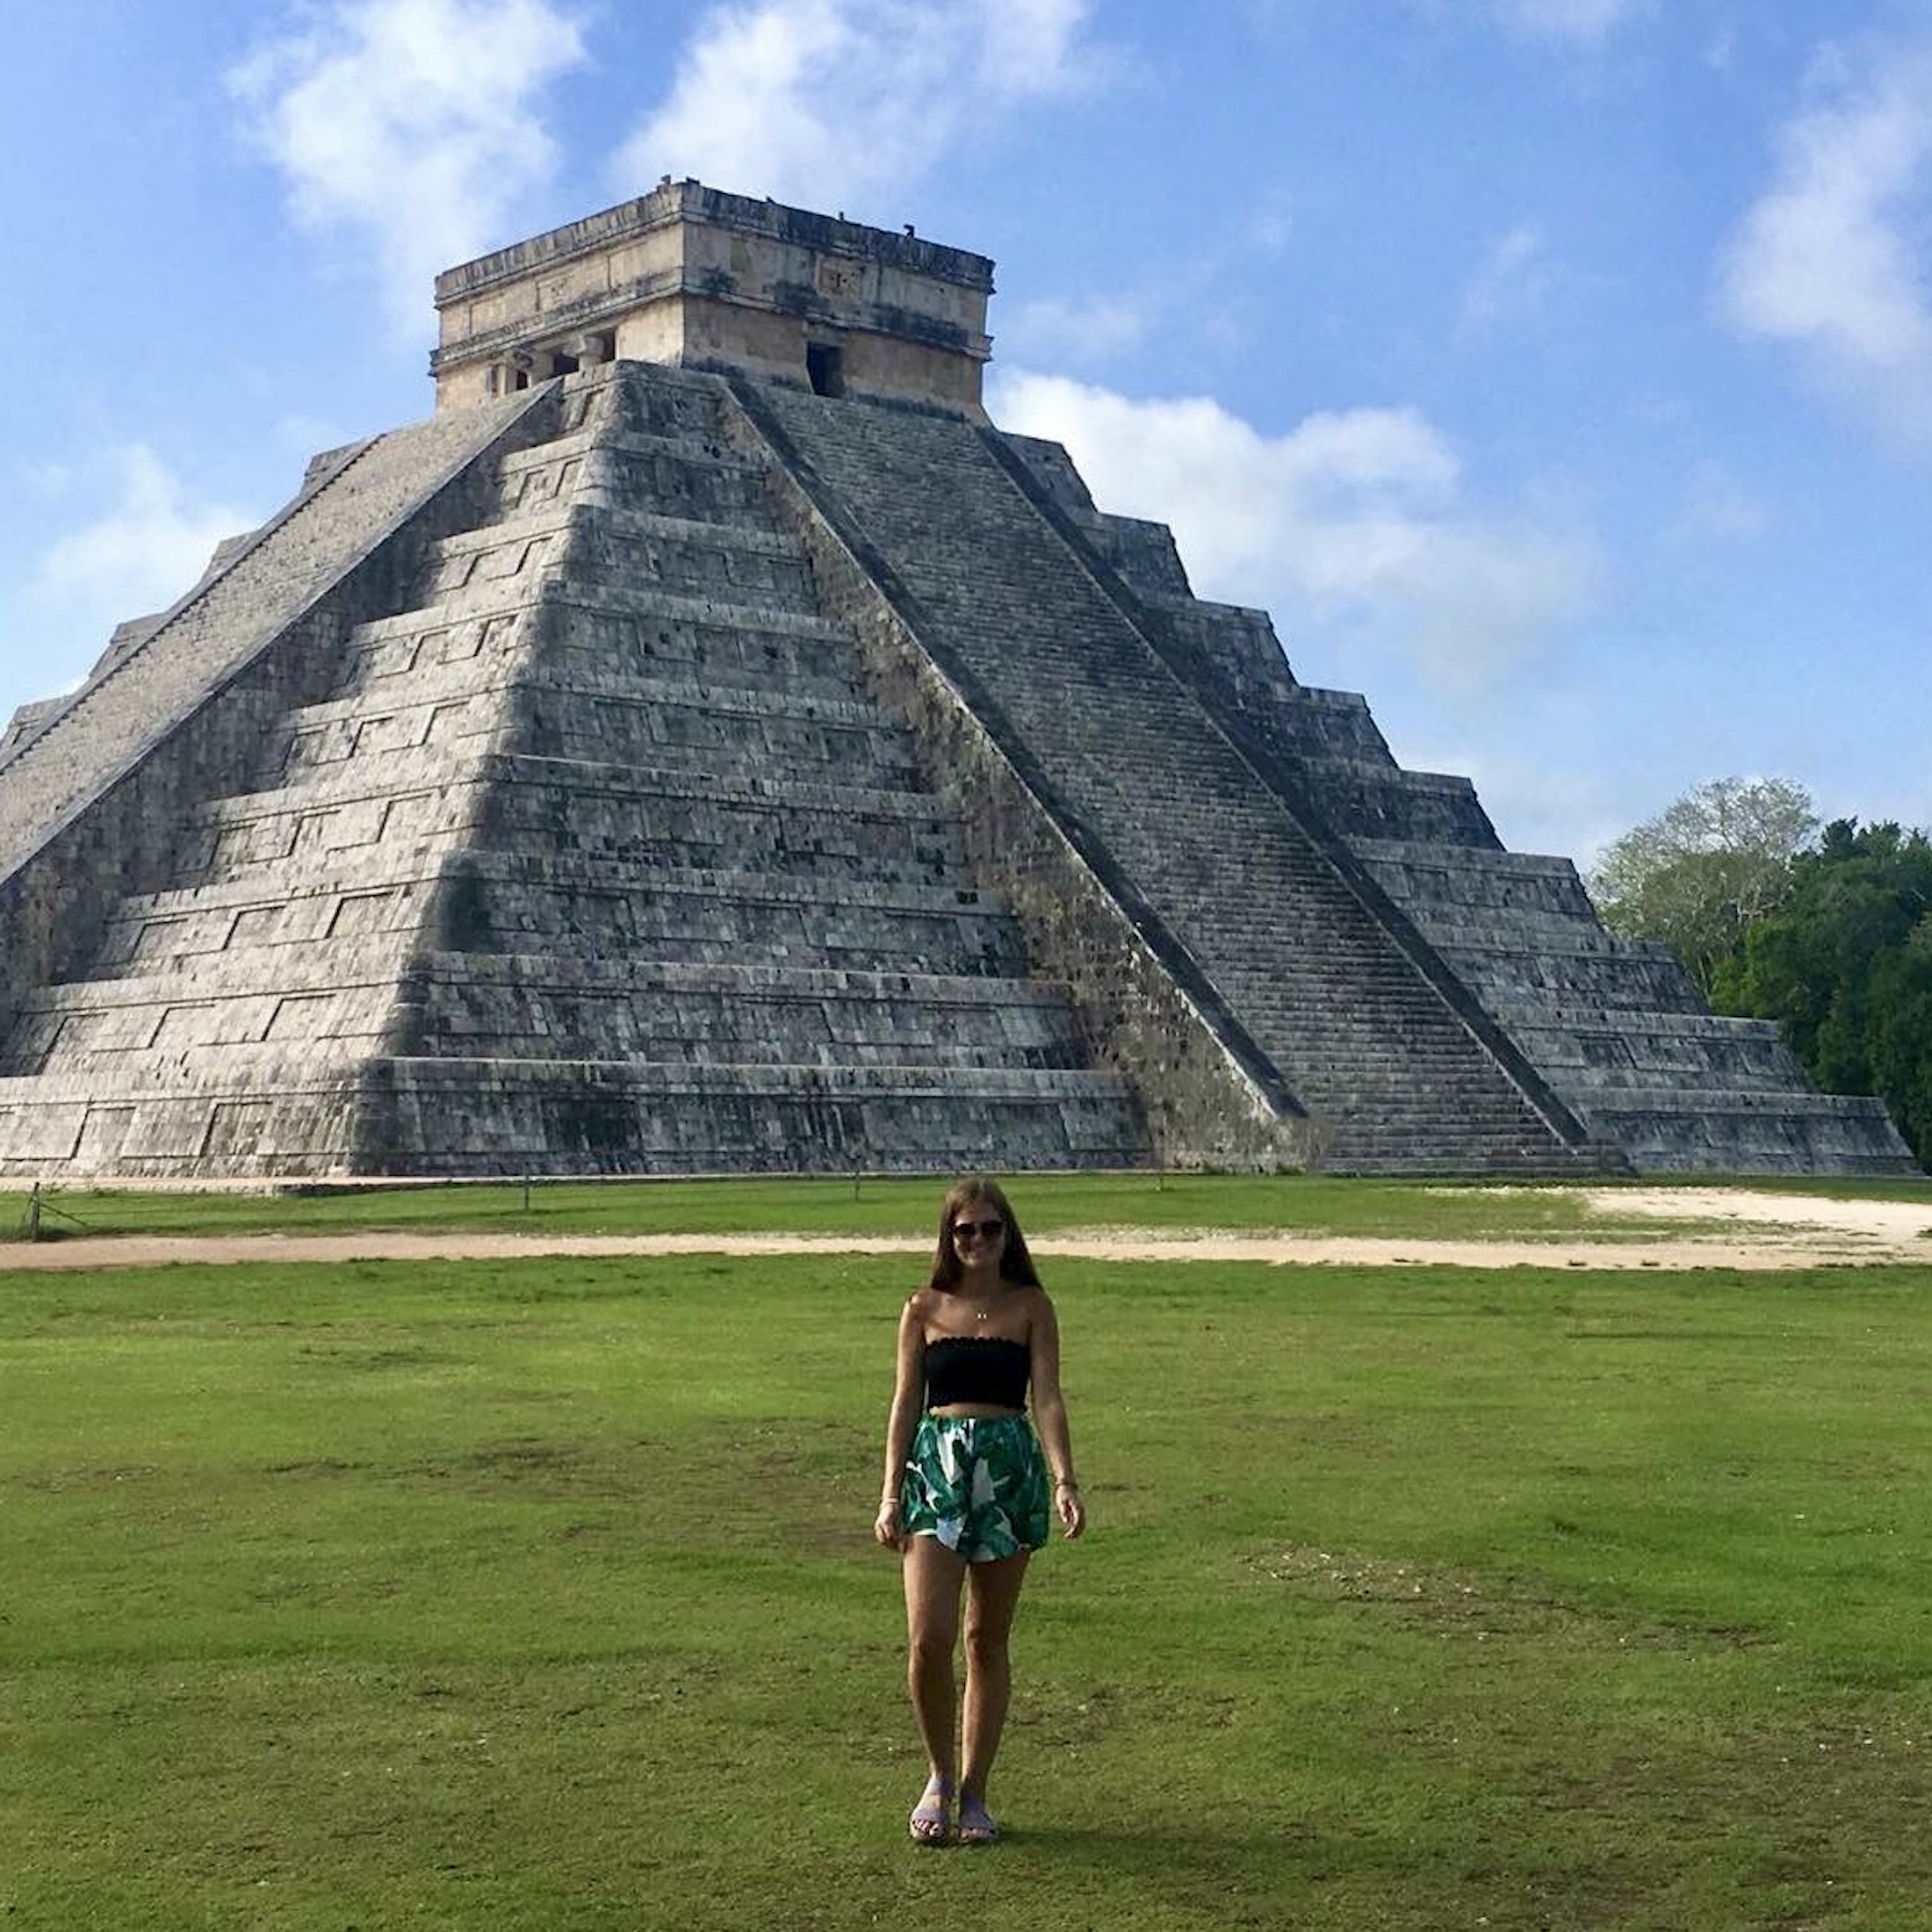 niki stands in front of chichén itzá archaeological site, yucatan peninsula, mexico (one of the new seven wonders of the world)